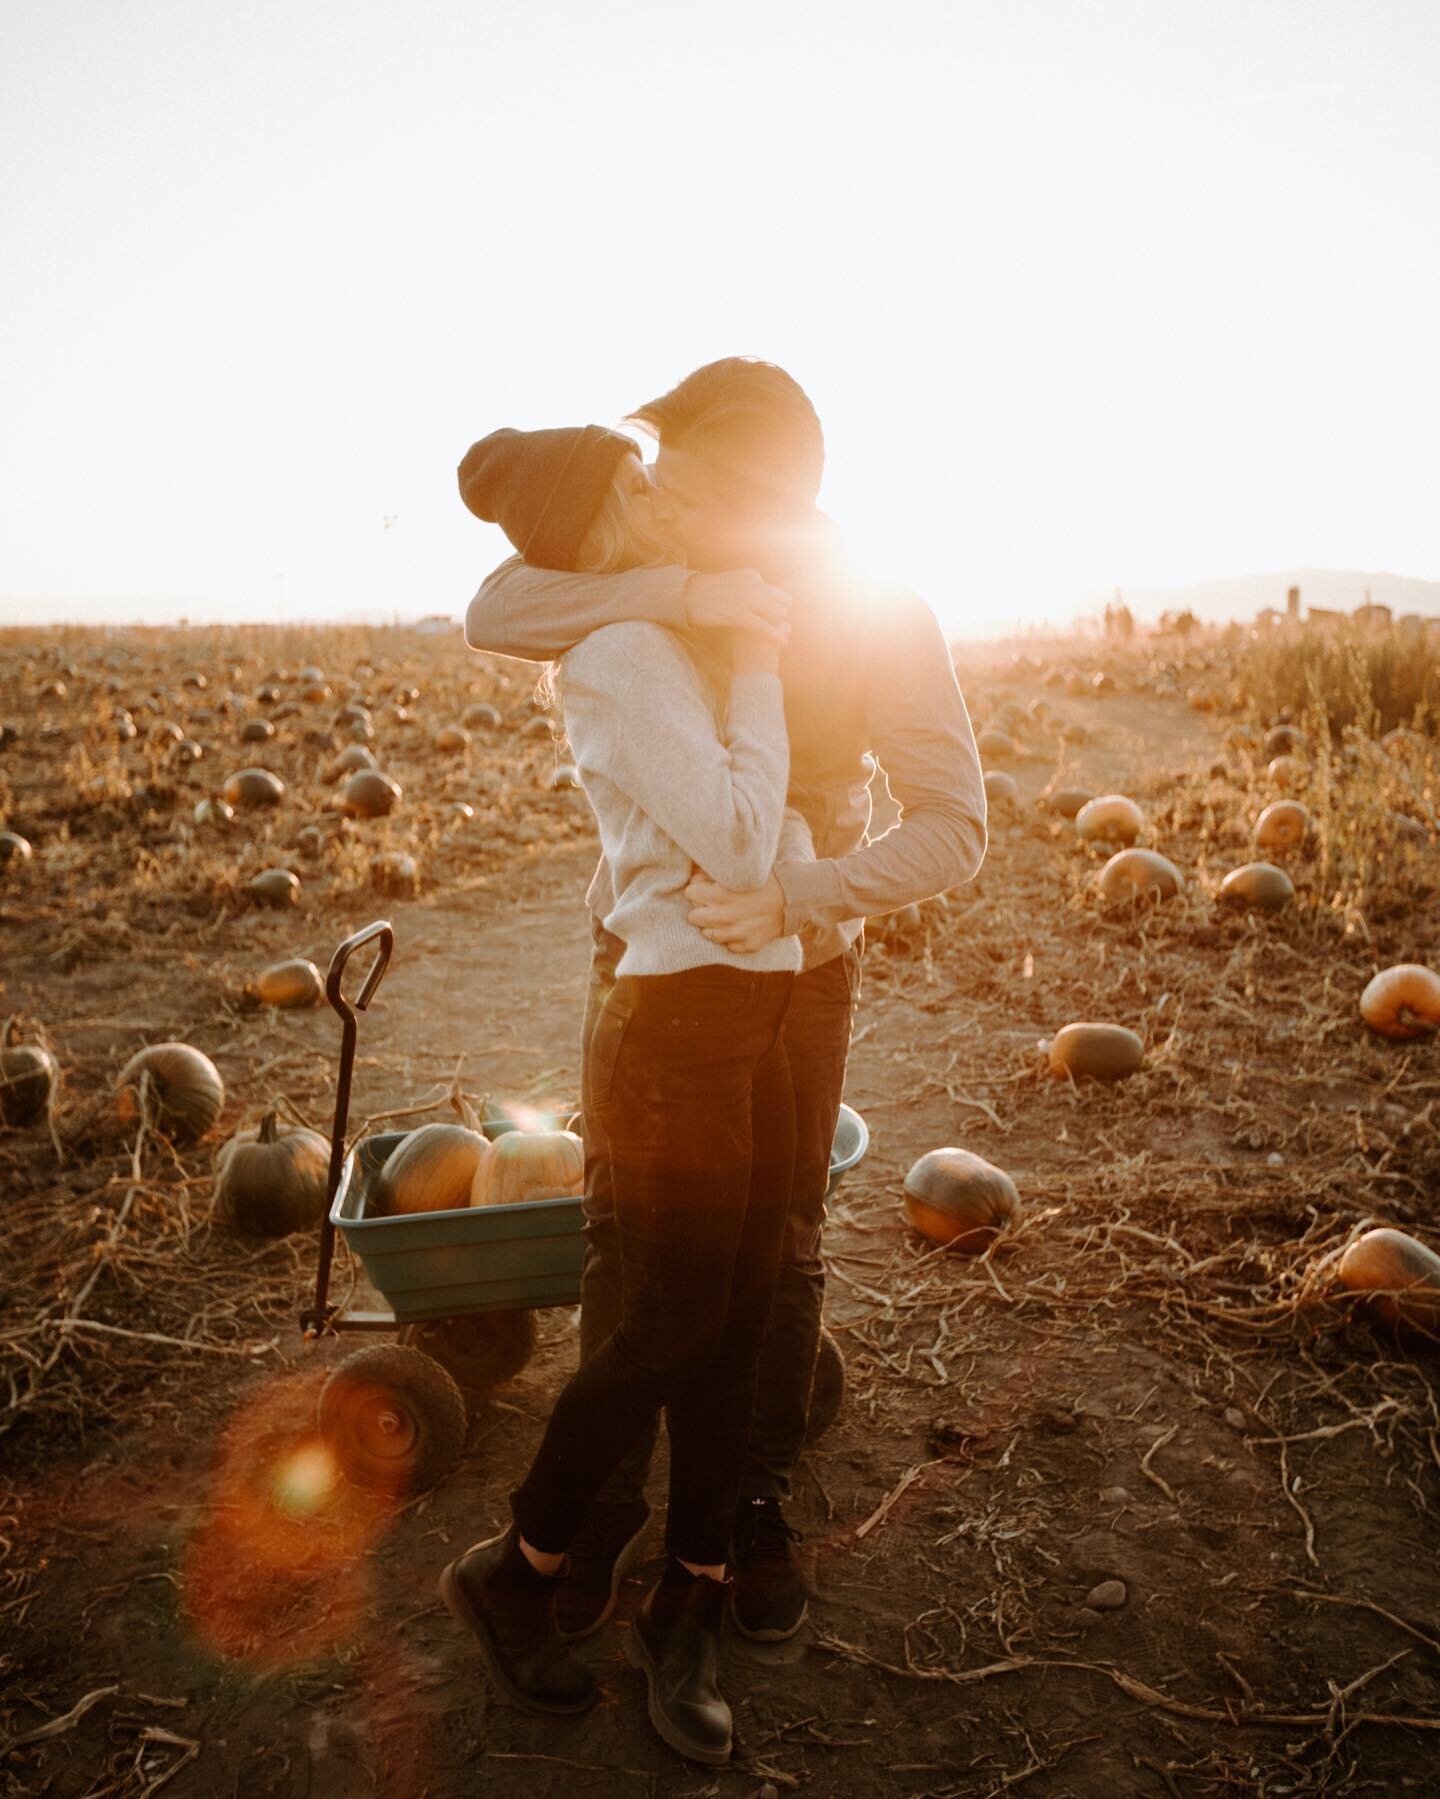 Just found out today is October 1st because of all the Halloween posts 🎃
.
.
.
.
.
#utahphotographer #utahweddingphotographer #elopementphotographer #destinationelopement #destinationweddingphotographer #zionweddingphotographer #zionelopement #fallw